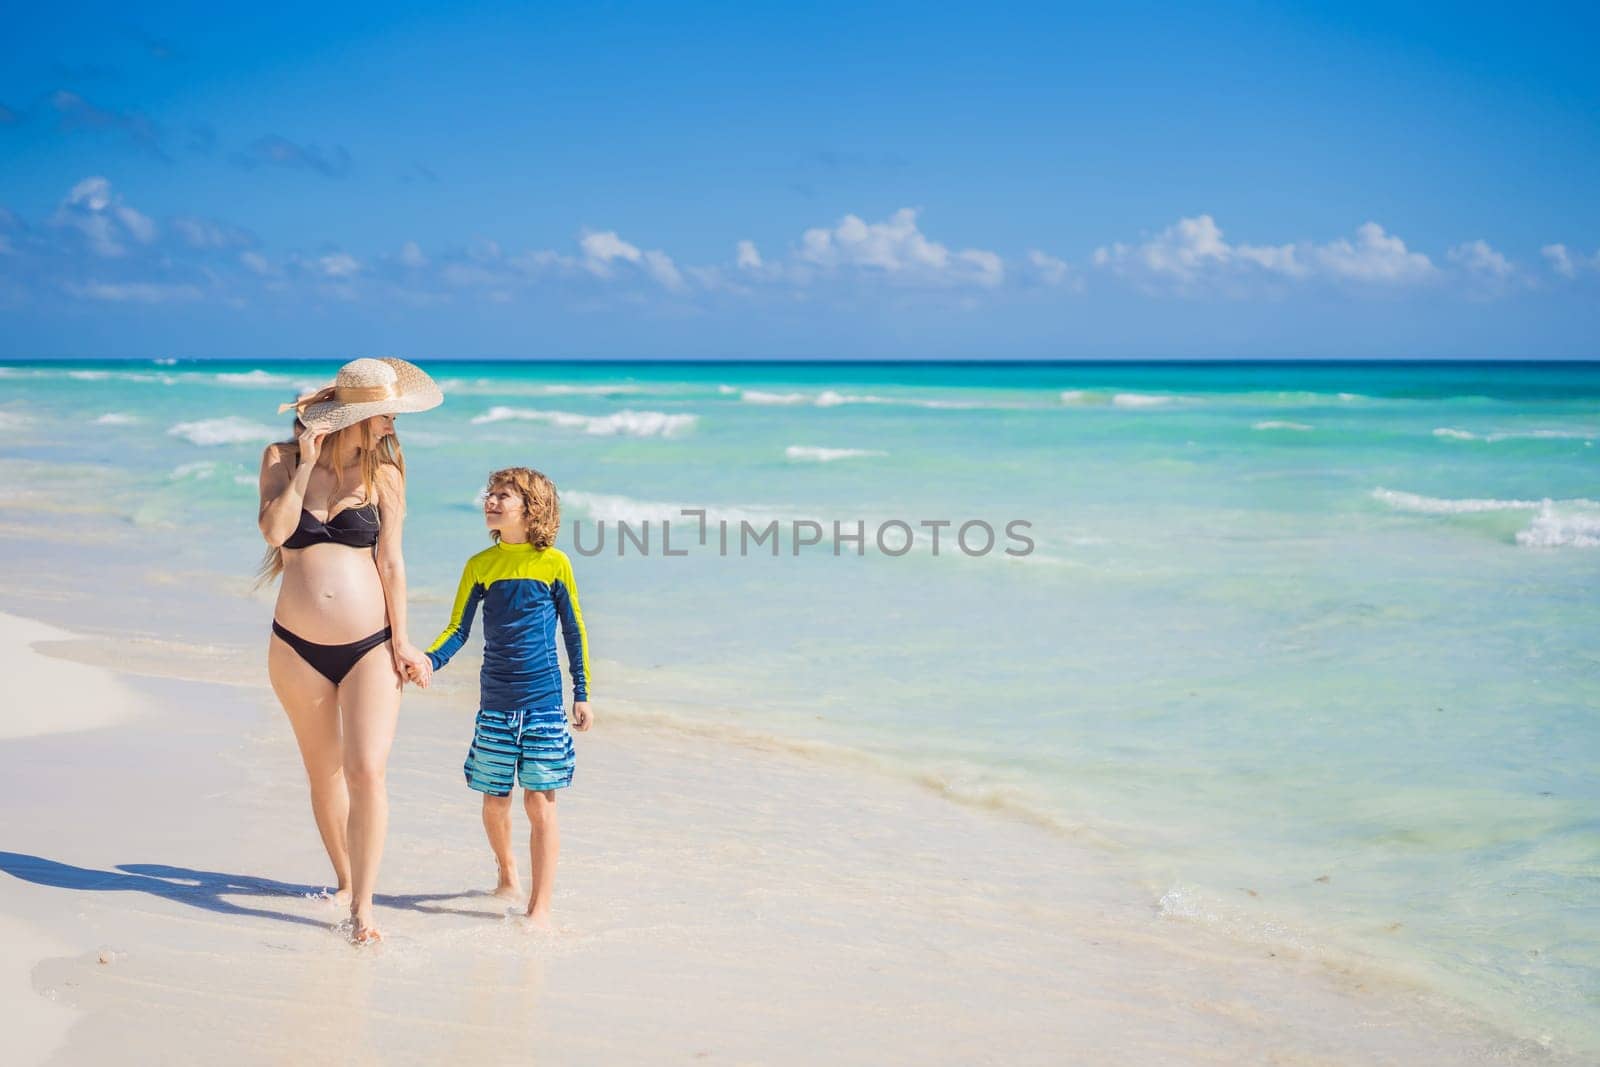 A radiant pregnant mother and her excited son share a tender moment on a serene, snow-white beach, celebrating family love amidst nature's beauty by galitskaya